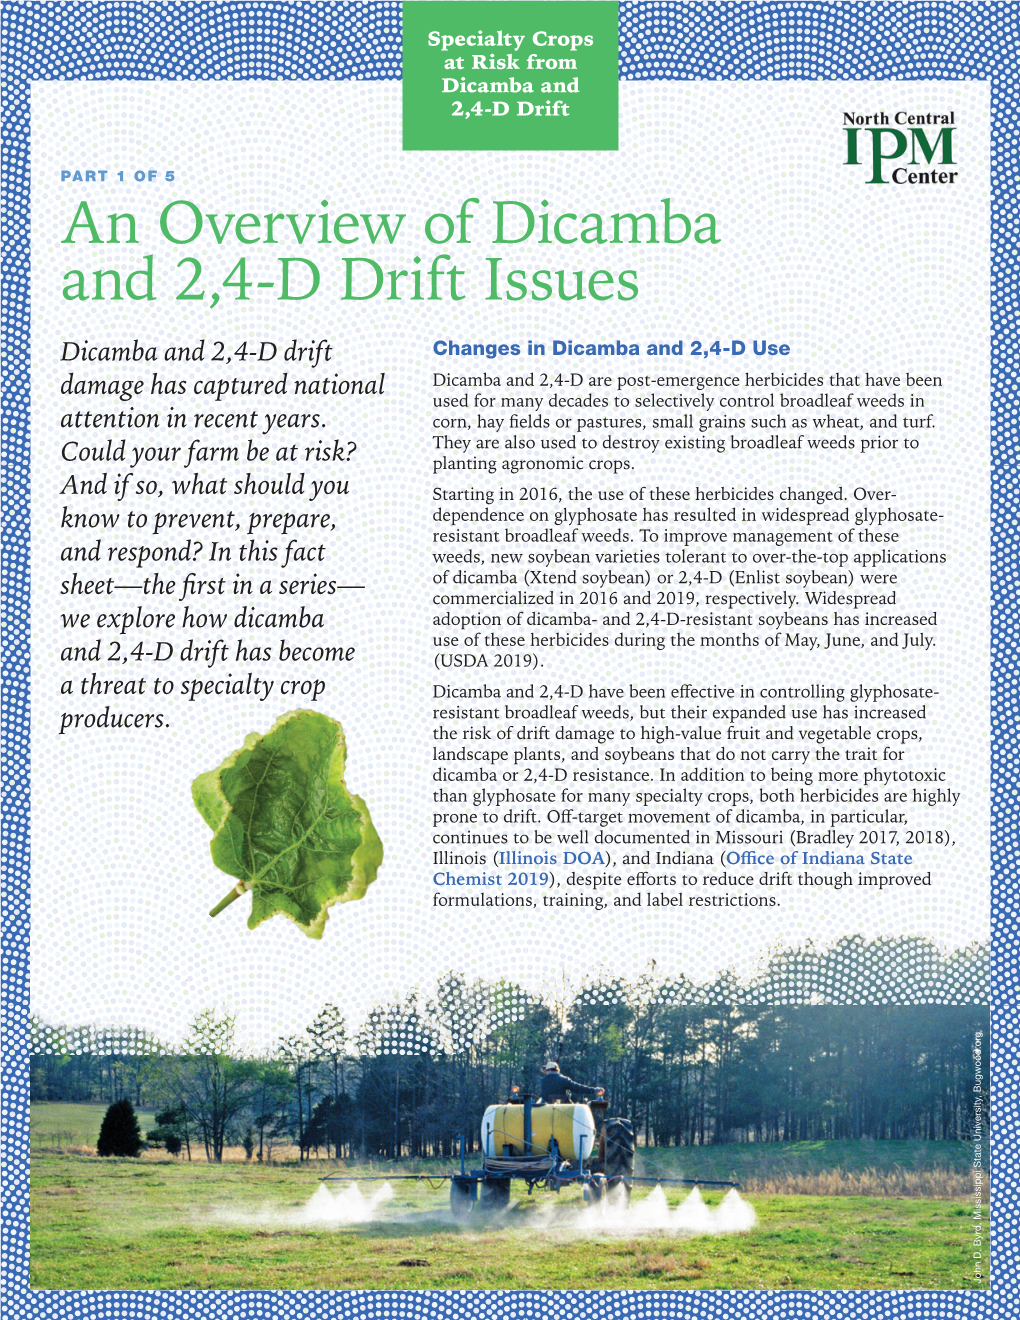 An Overview of Dicamba and 2,4-D Drift Issues